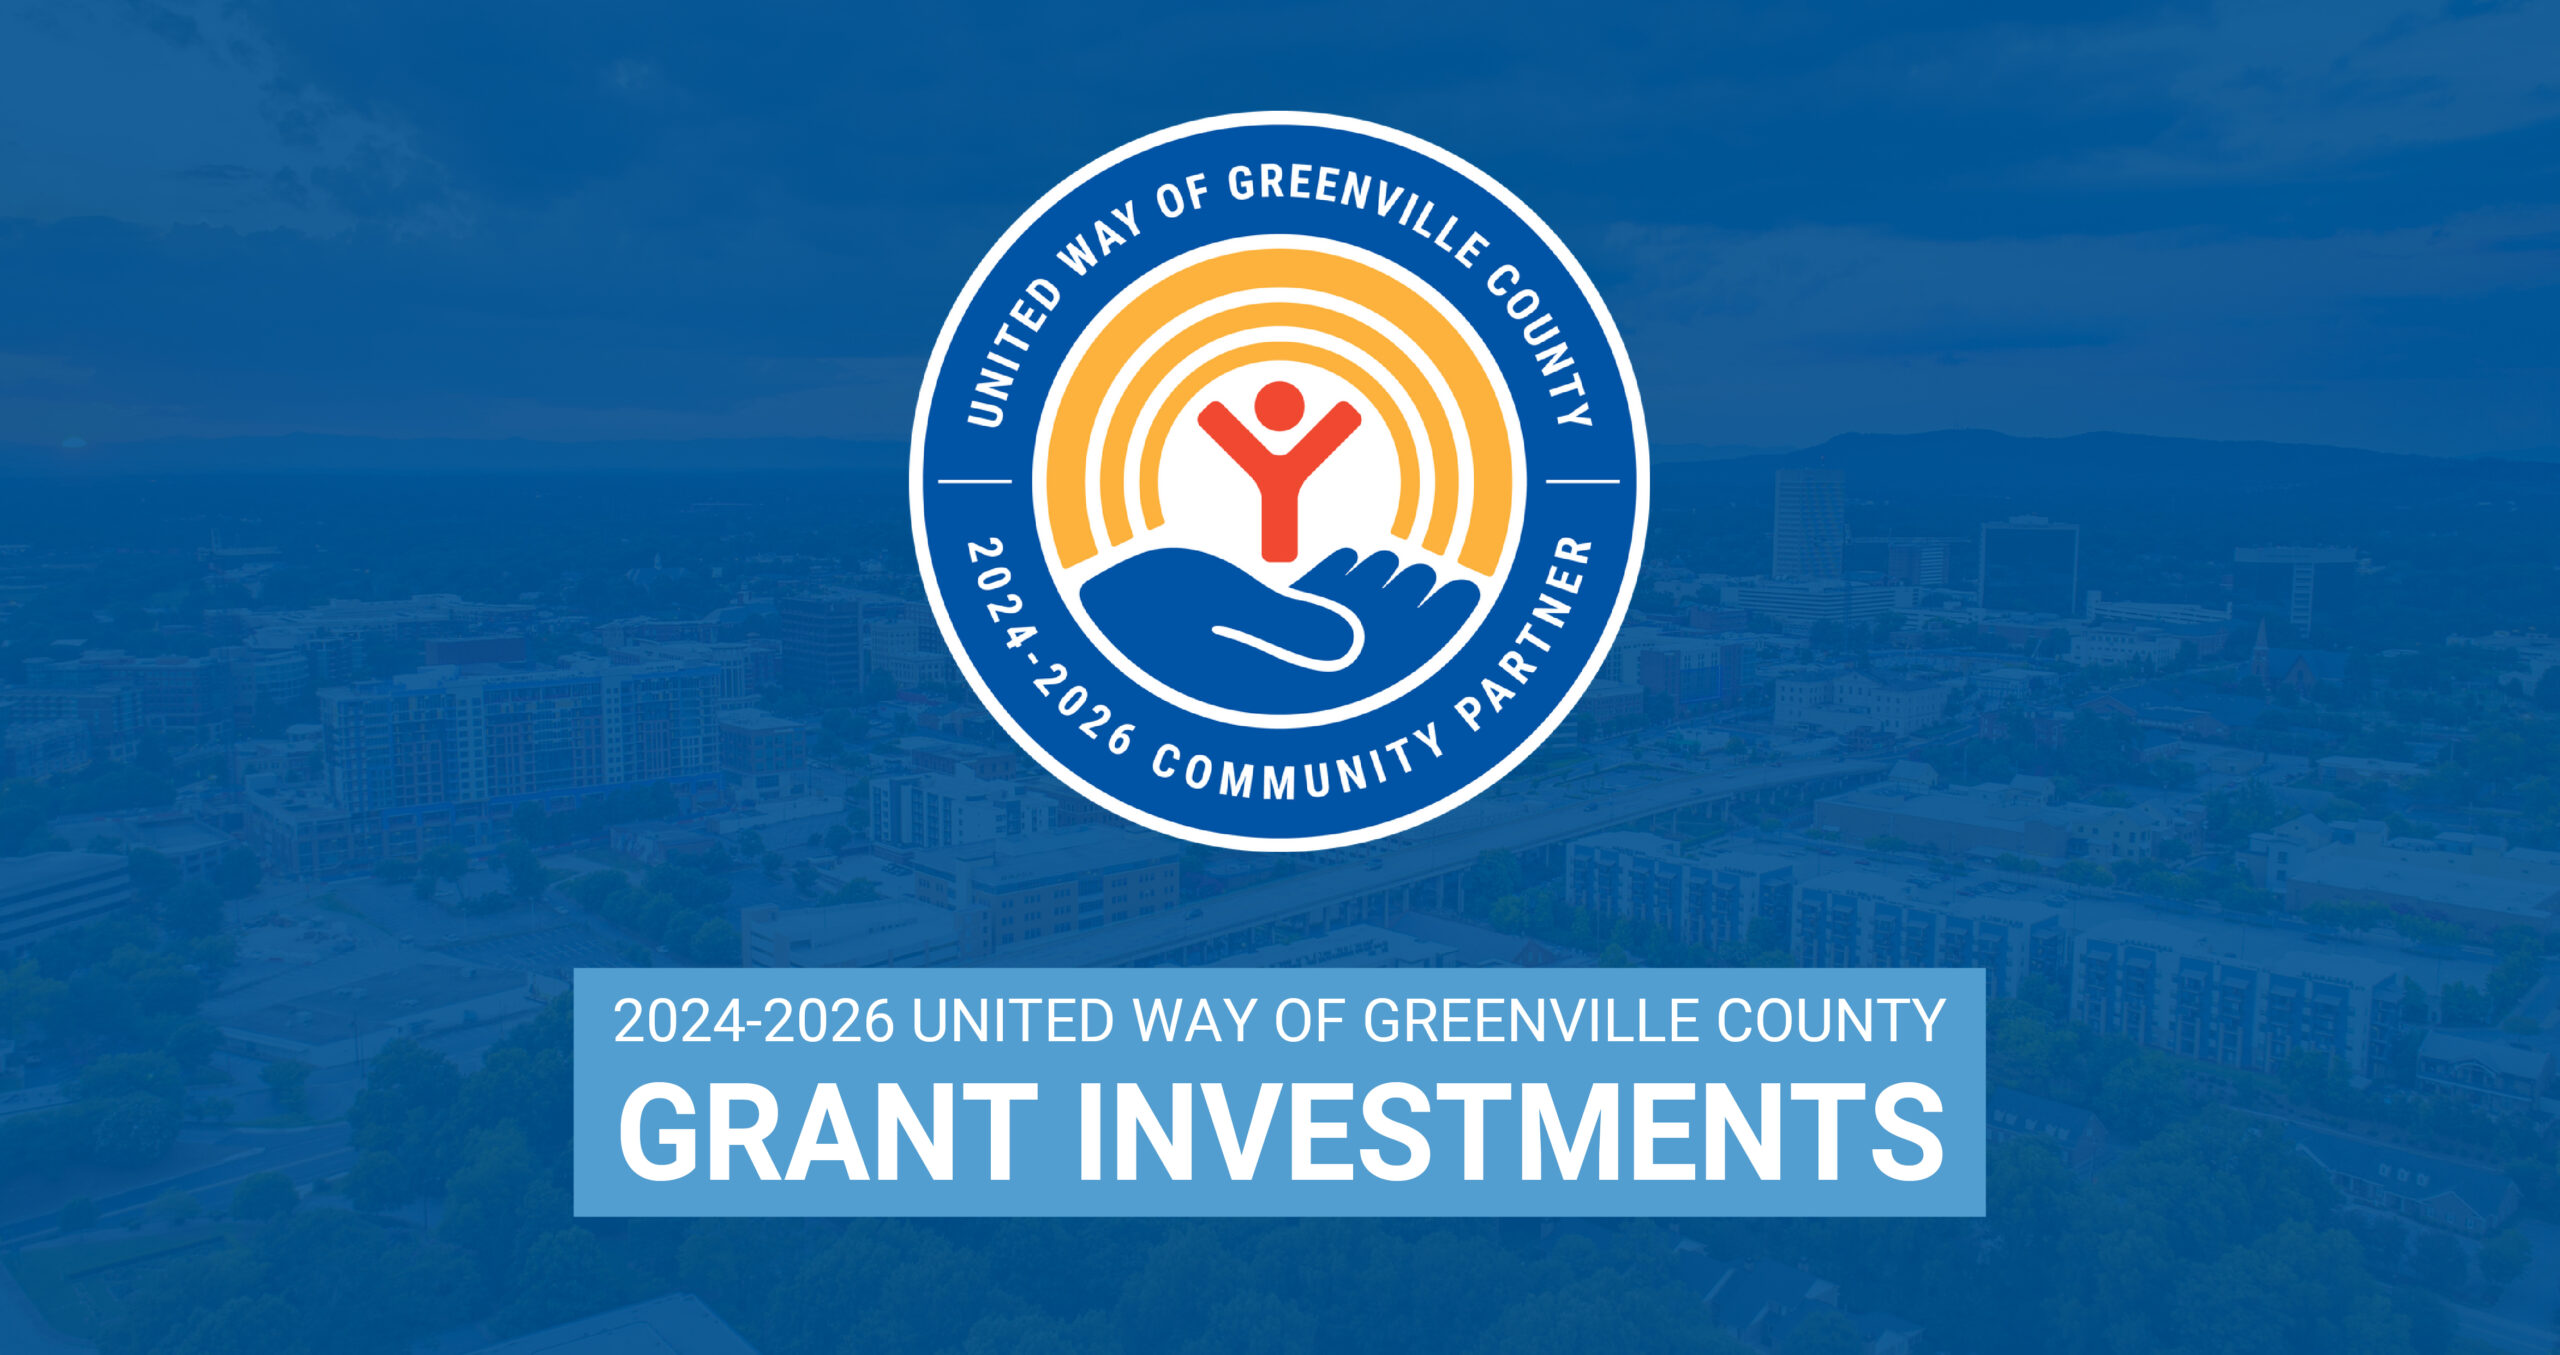 United Way announces new 3-year, $9 million funding to 48 community partners